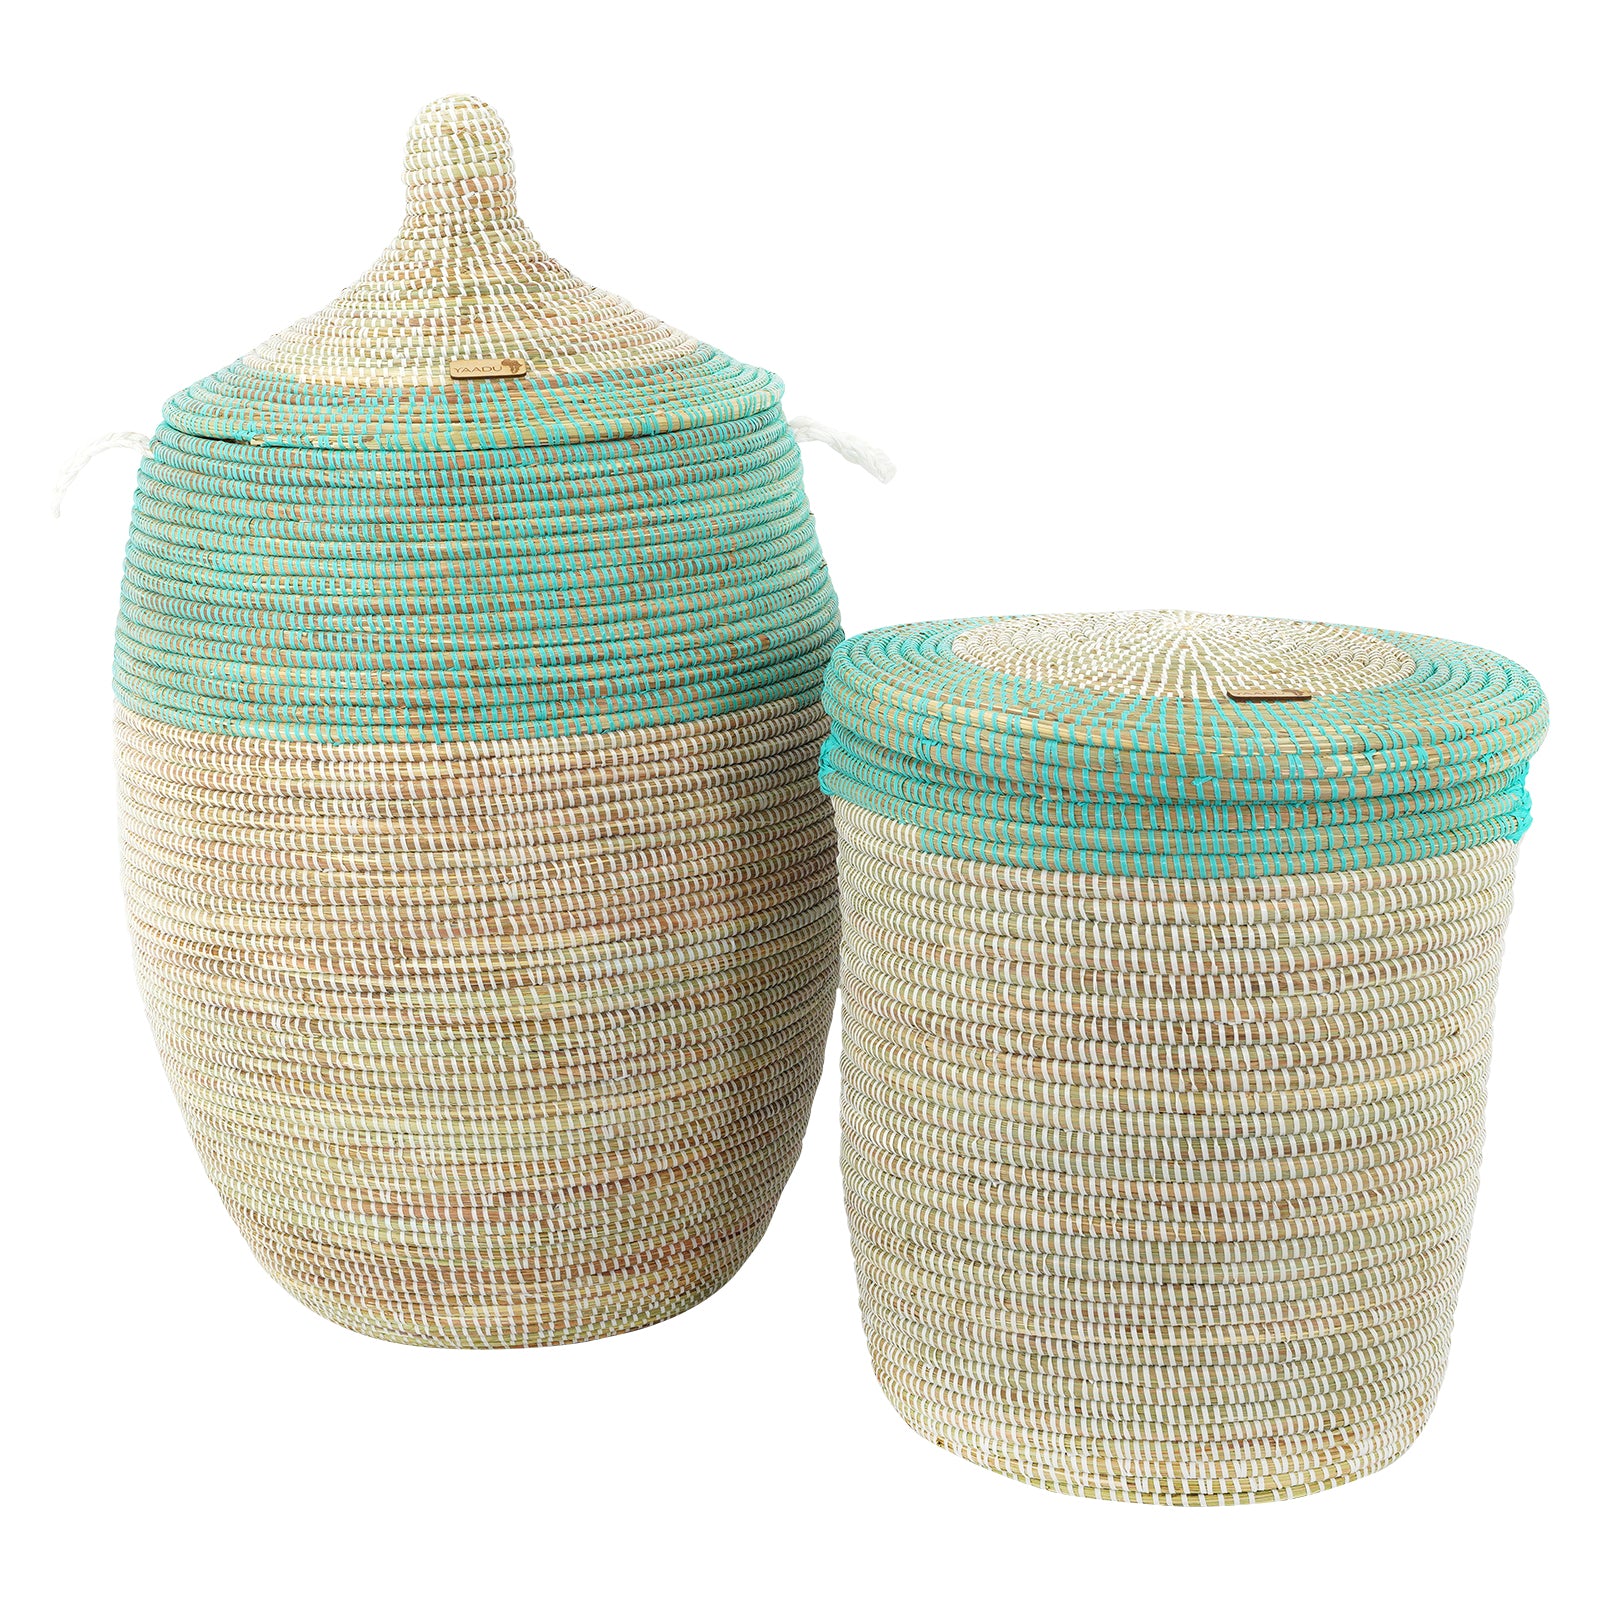 Set: African laundry baskets with lid – turquoise